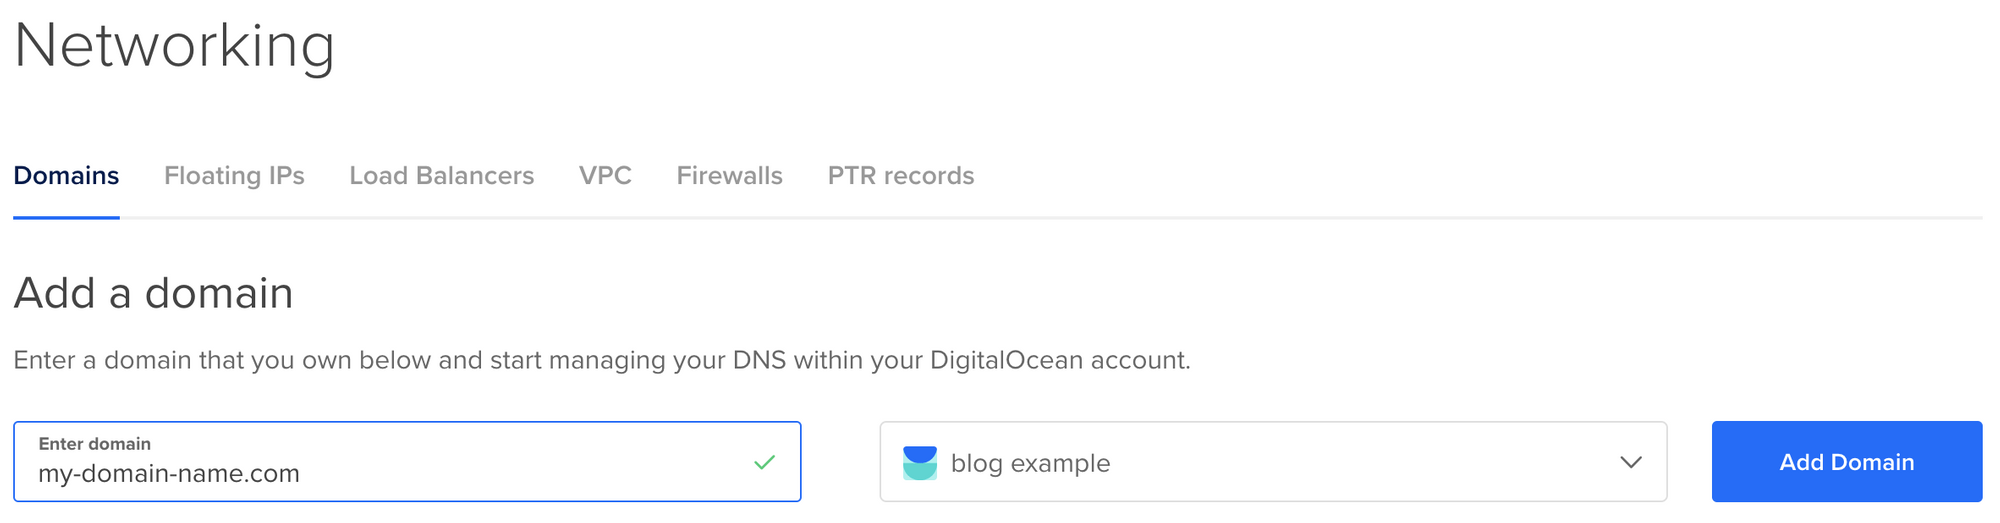 How to connect a Namecheap domain with DigitalOcean